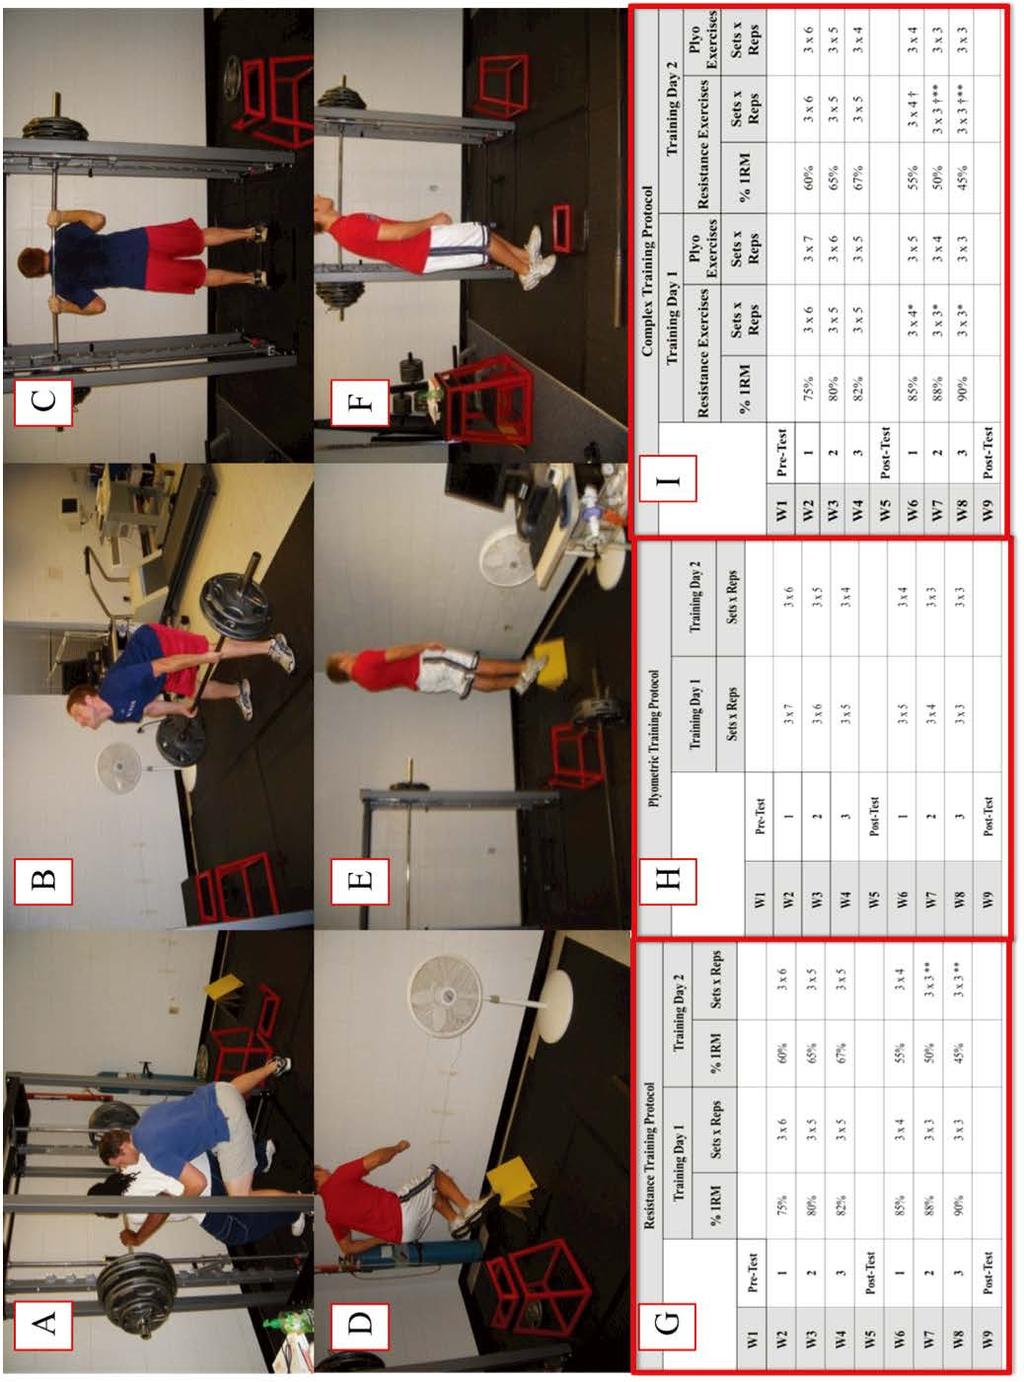 MacDonald et al. A comparison of the effects of six weeks of traditional resistance training, plyometric training, and complex training on measures of power 15 Figure 1 Figure 1A.